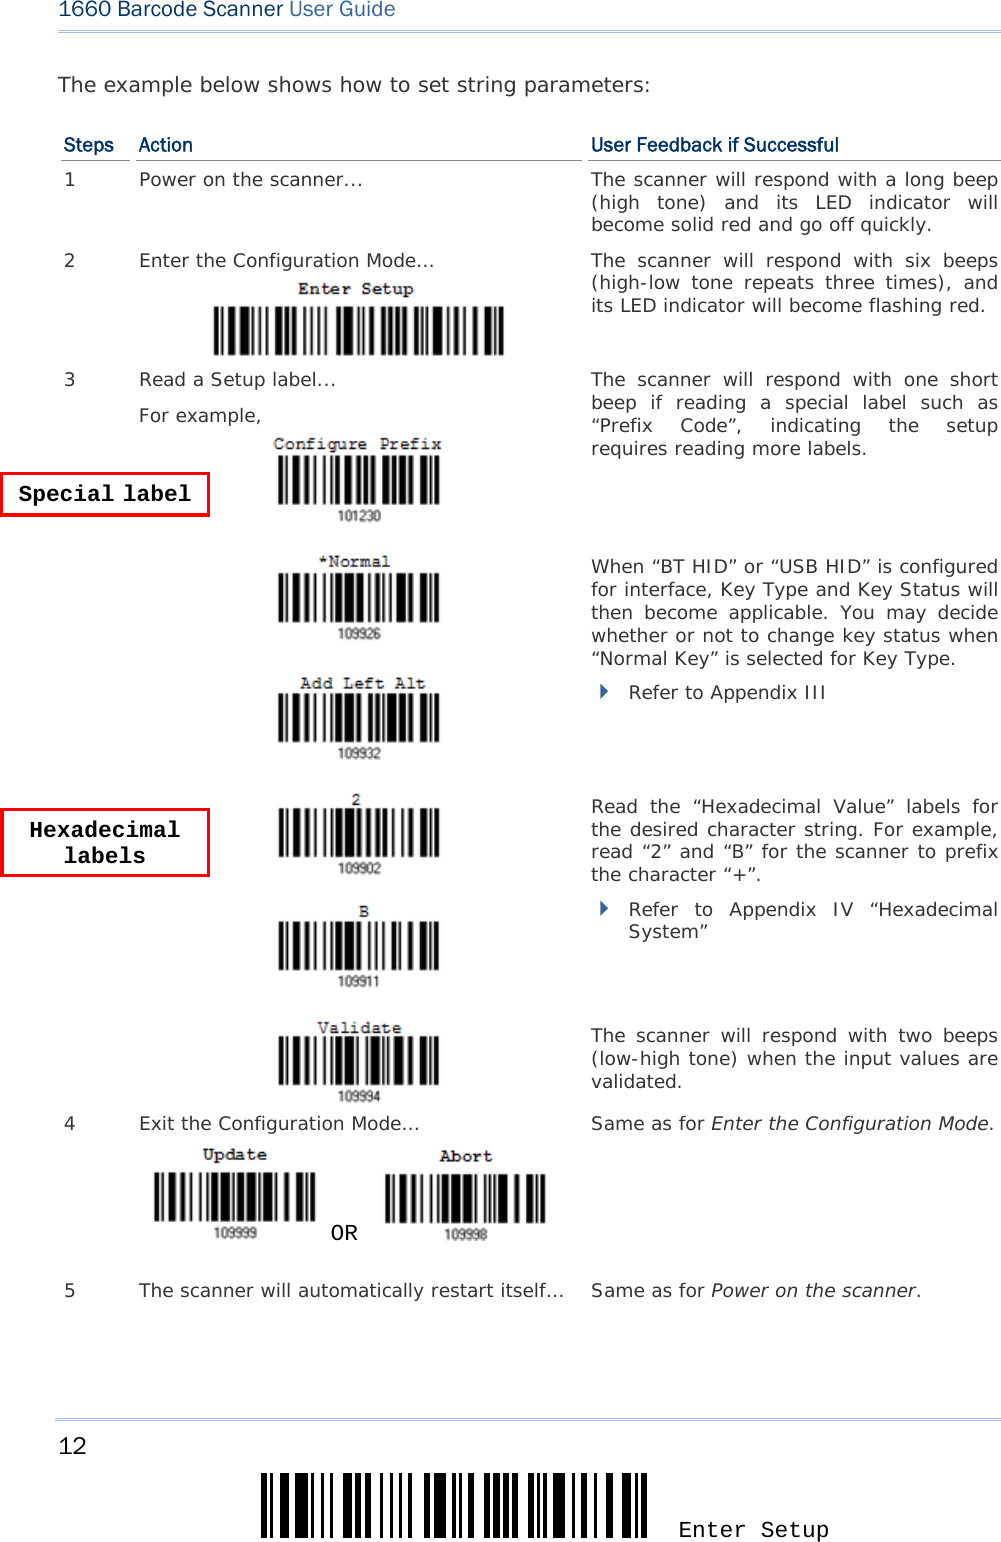 12 Enter Setup 1660 Barcode Scanner User Guide  The example below shows how to set string parameters: Steps  Action  User Feedback if Successful 1  Power on the scanner... The scanner will respond with a long beep (high tone) and its LED indicator will become solid red and go off quickly. 2  Enter the Configuration Mode…  The scanner will respond with six beeps (high-low tone repeats three times), and its LED indicator will become flashing red.  3  Read a Setup label... For example,   The scanner will respond with one short beep if reading a special label such as “Prefix Code”, indicating the setup requires reading more labels.       When “BT HID” or “USB HID” is configured for interface, Key Type and Key Status will then become applicable. You may decide whether or not to change key status when “Normal Key” is selected for Key Type.  Refer to Appendix III     Read the “Hexadecimal Value” labels for the desired character string. For example, read “2” and “B” for the scanner to prefix the character “+”.  Refer to Appendix IV “Hexadecimal System”   The scanner will respond with two beeps (low-high tone) when the input values are validated. 4  Exit the Configuration Mode…   OR     Same as for Enter the Configuration Mode. 5  The scanner will automatically restart itself…  Same as for Power on the scanner.  Special label Hexadecimal labels 